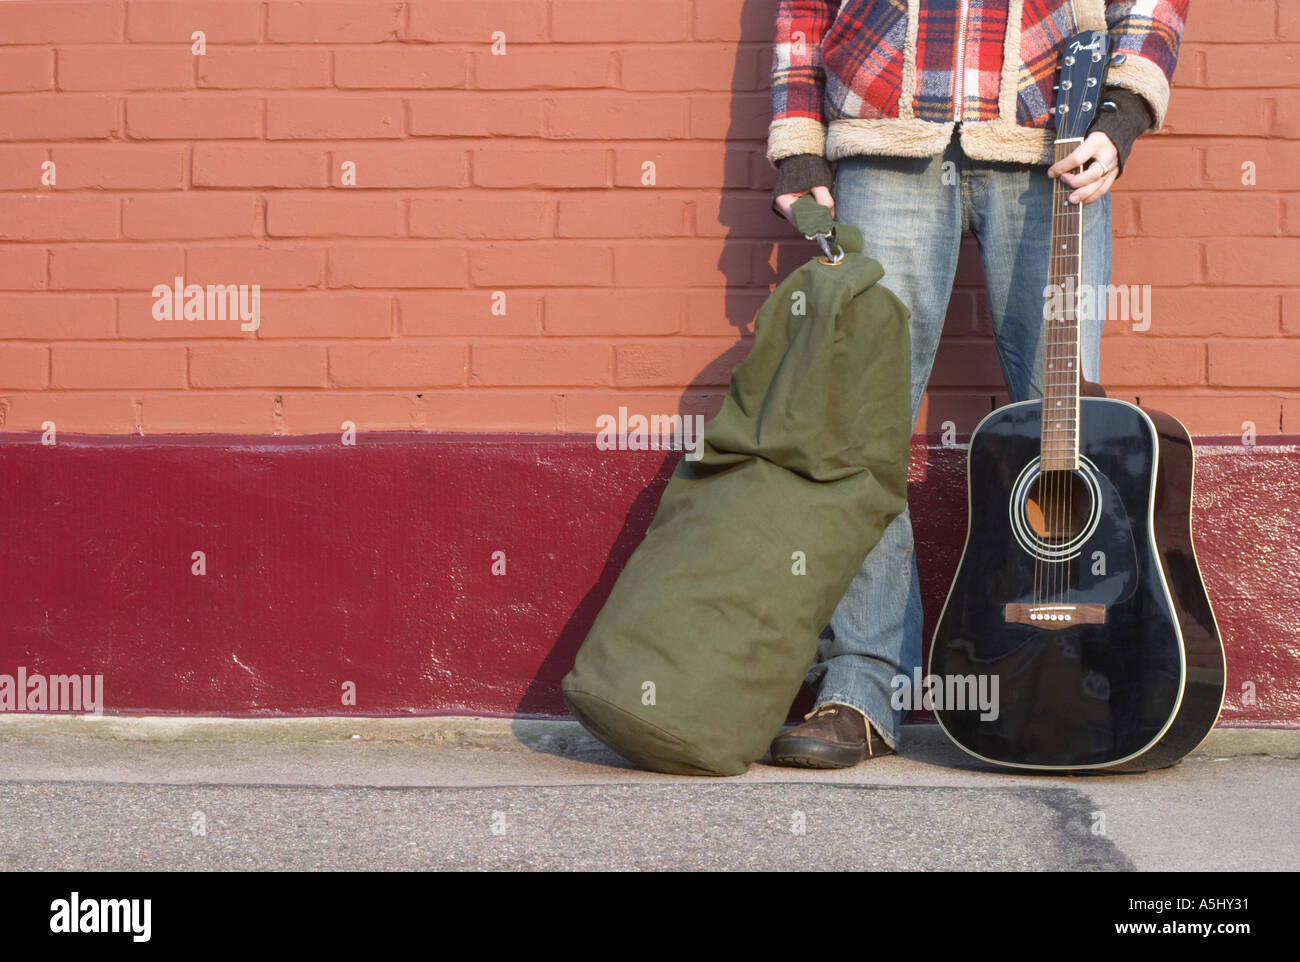 man stood against red wall with duffel bag and guitar Stock Photo